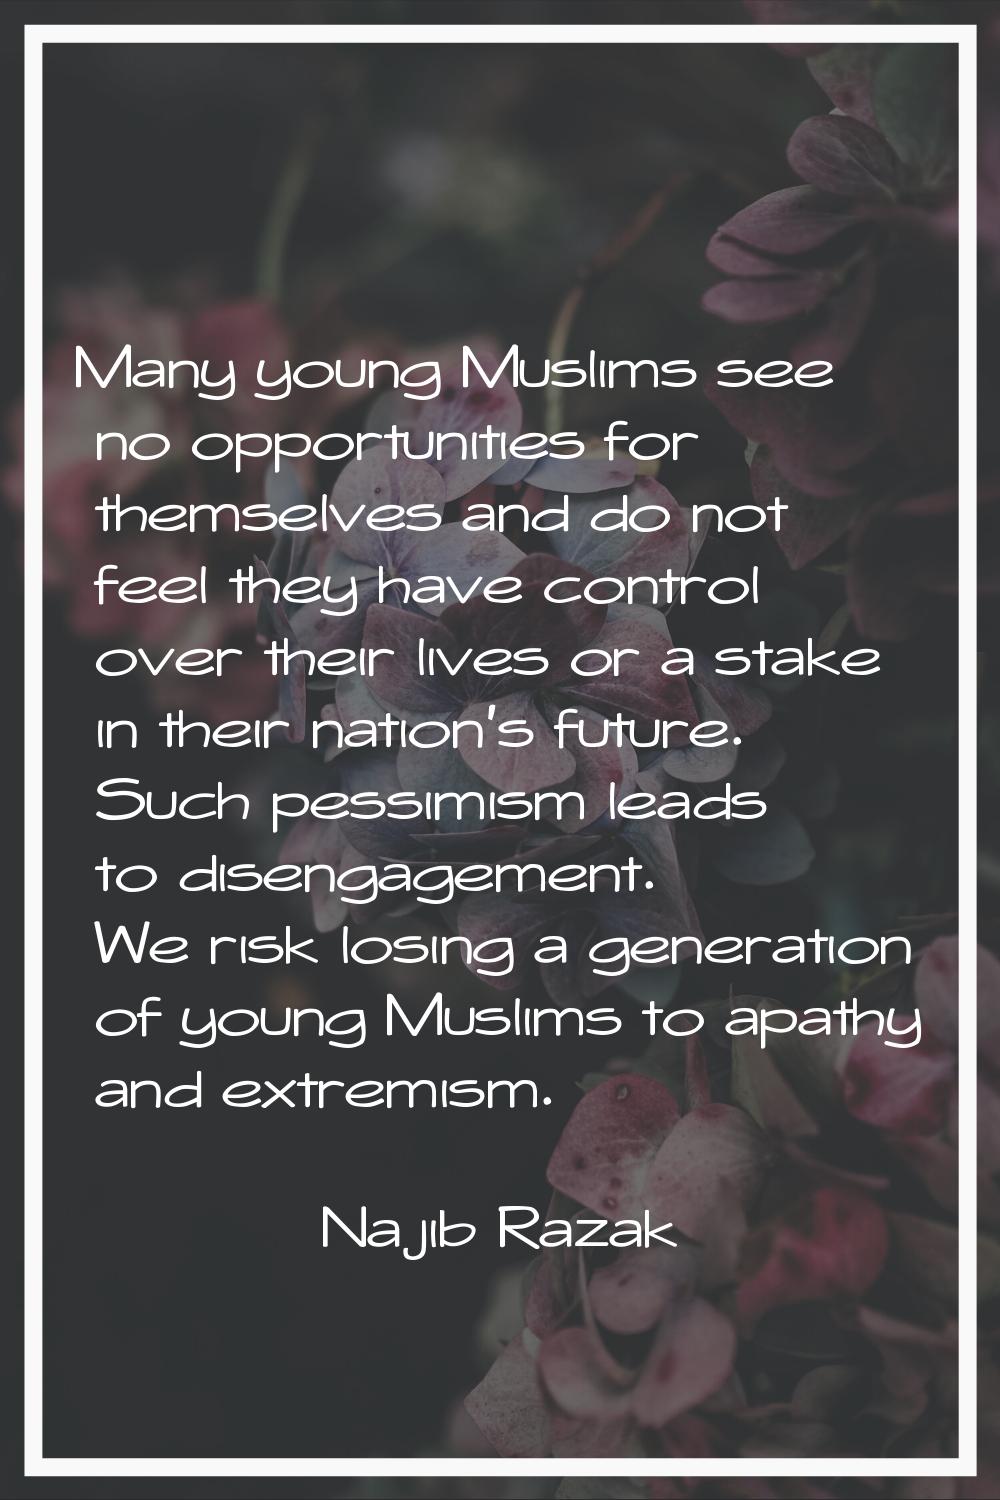 Many young Muslims see no opportunities for themselves and do not feel they have control over their